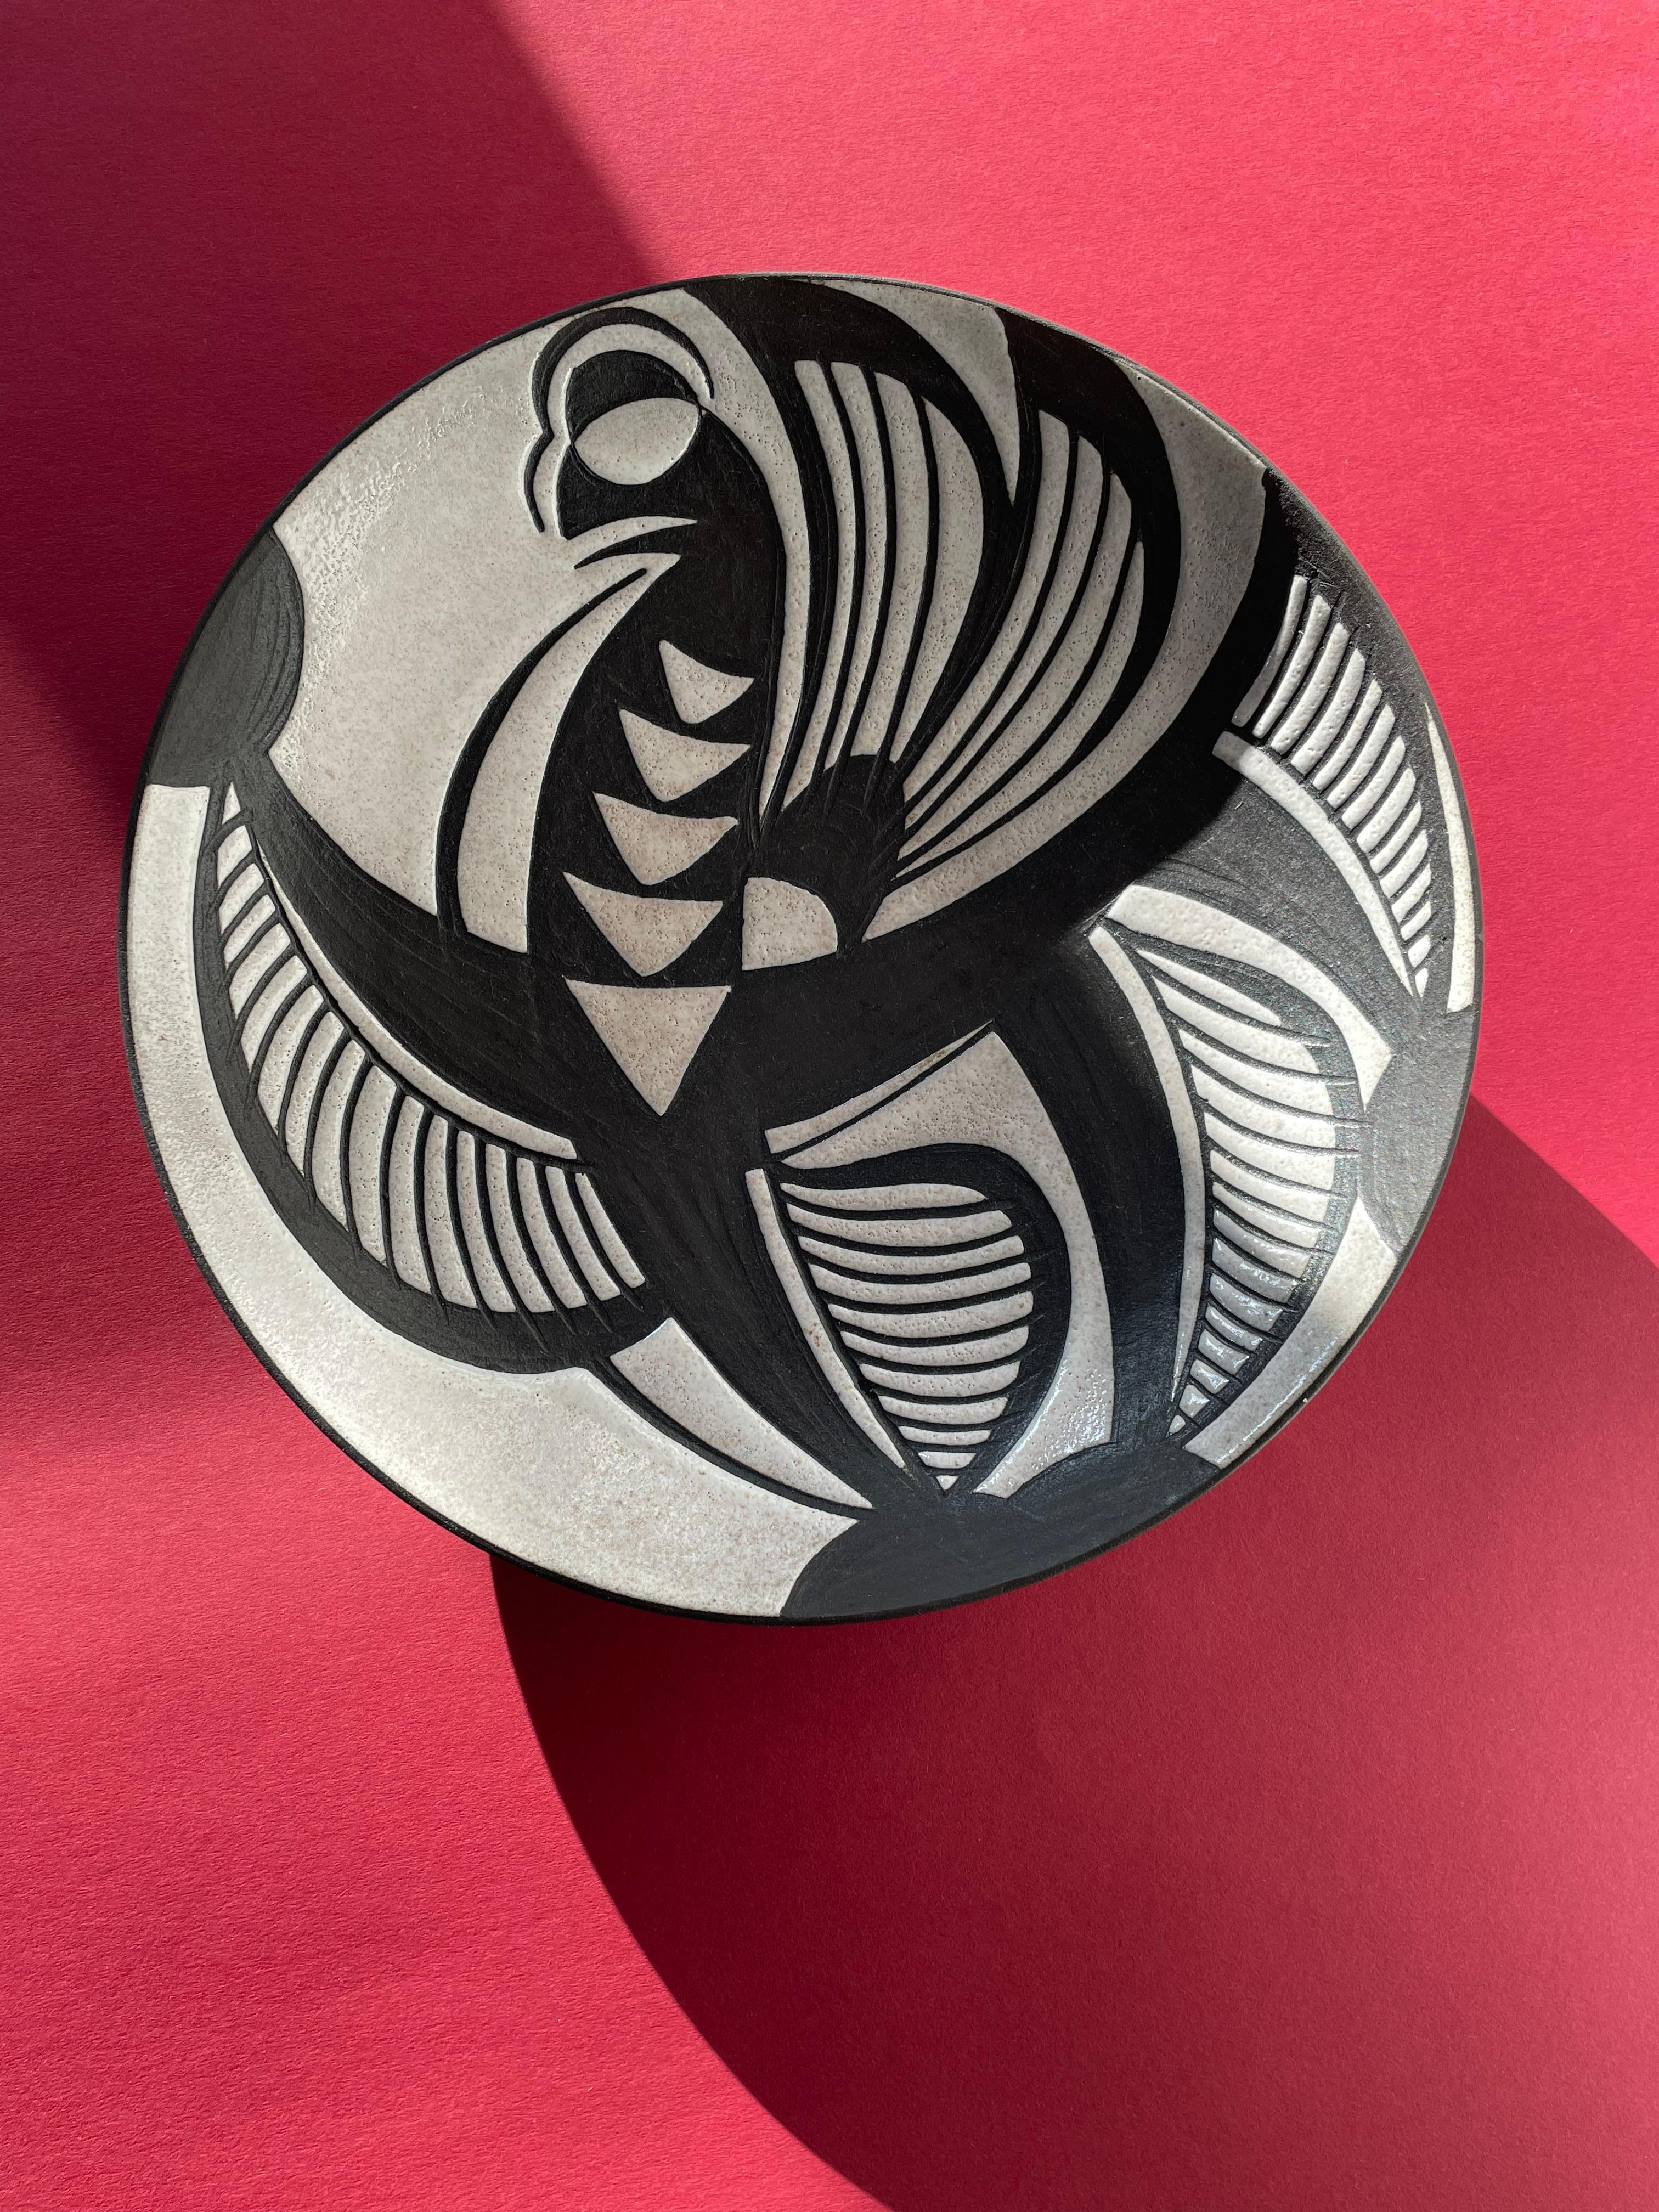 Danish modernist decorative plate / wall decoration / centerpiece with strong graphic decor from the Tribal Harlekin series by ceramic artist Marianne Starck (1931-2007). Shiny bone white glaze with hand-carved graphic lines in raw anthracite